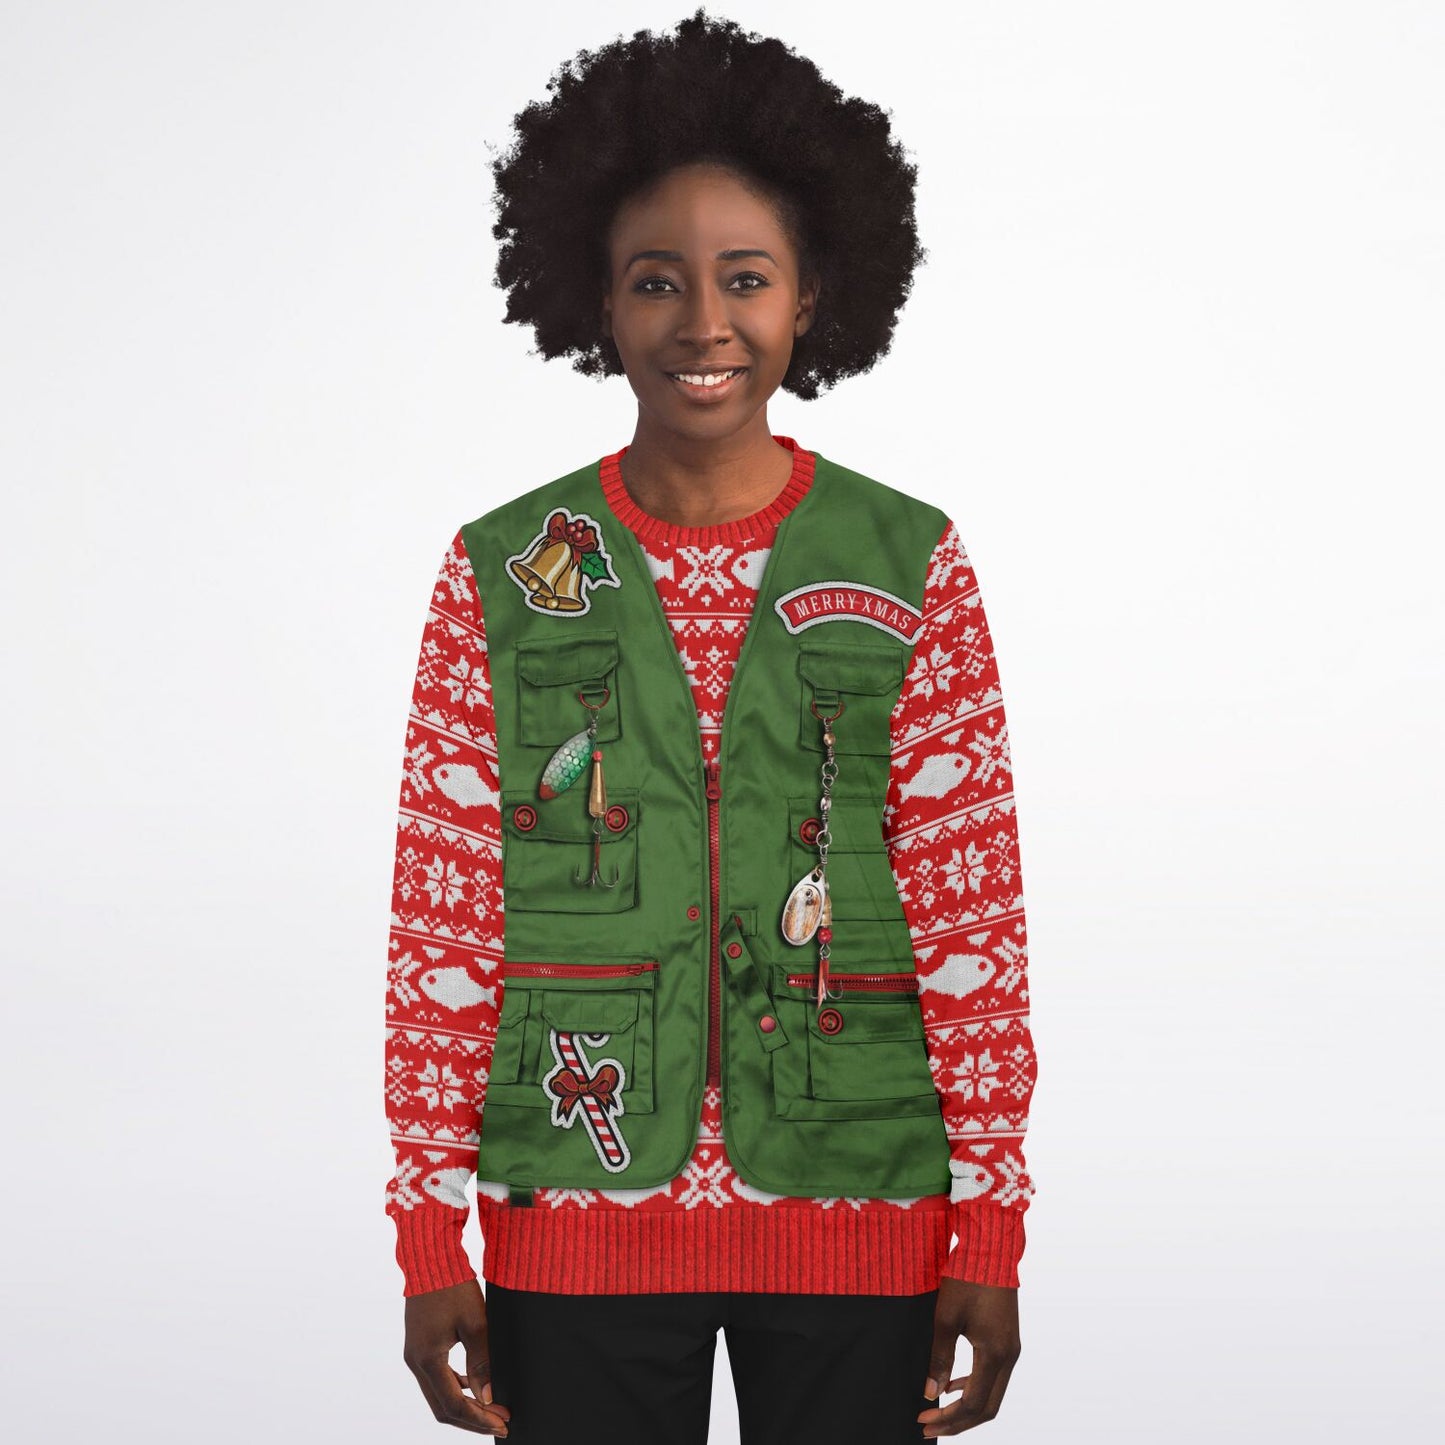 Merry Fishmas Ugly Sweater - Sport Finesse